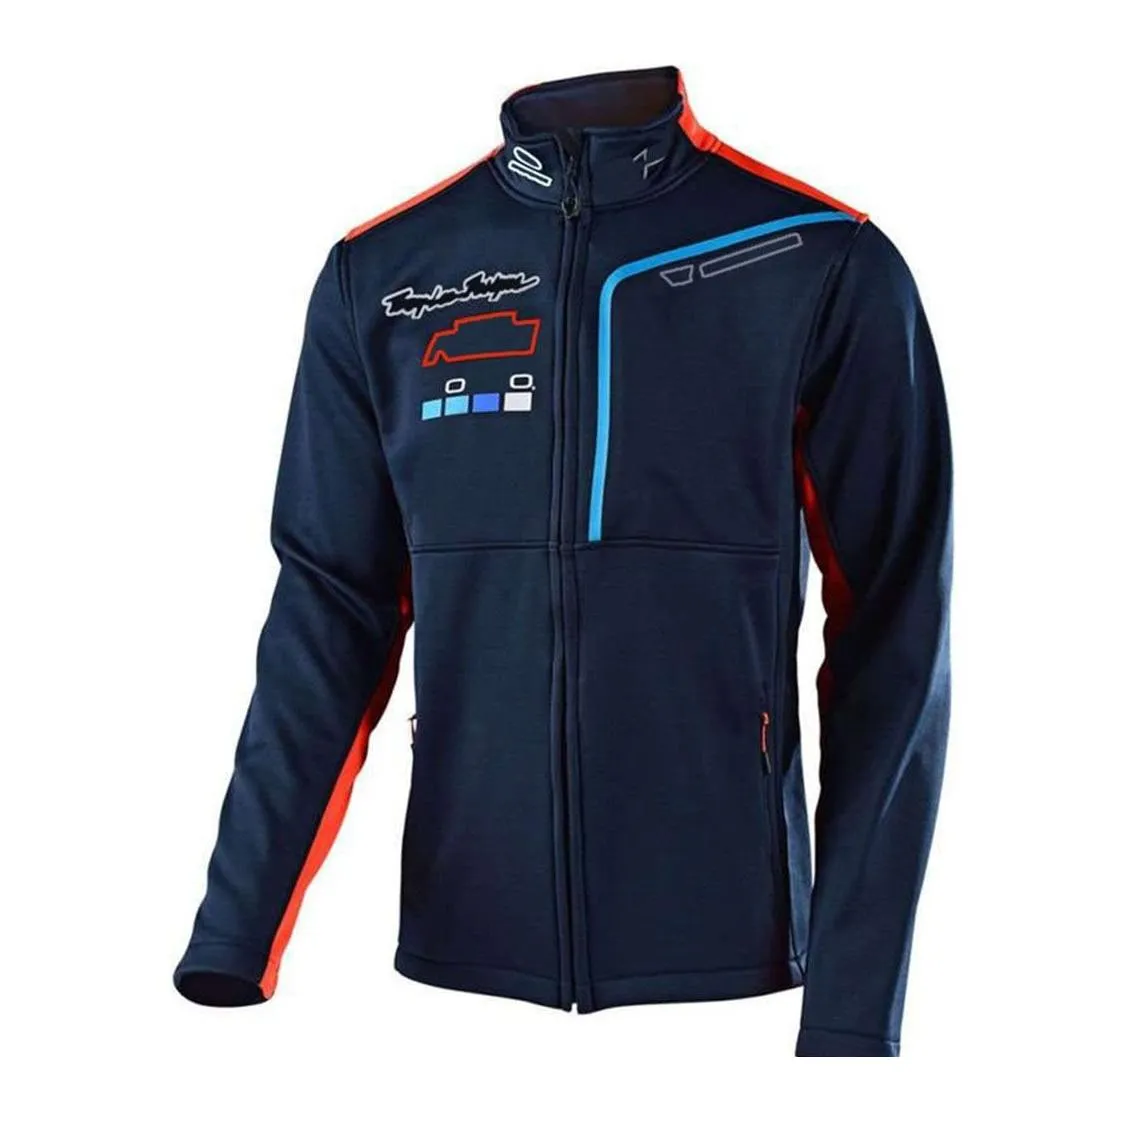 moto motorcycle riding casual sweater off-road fan racing suit outdoor sports rider jacket